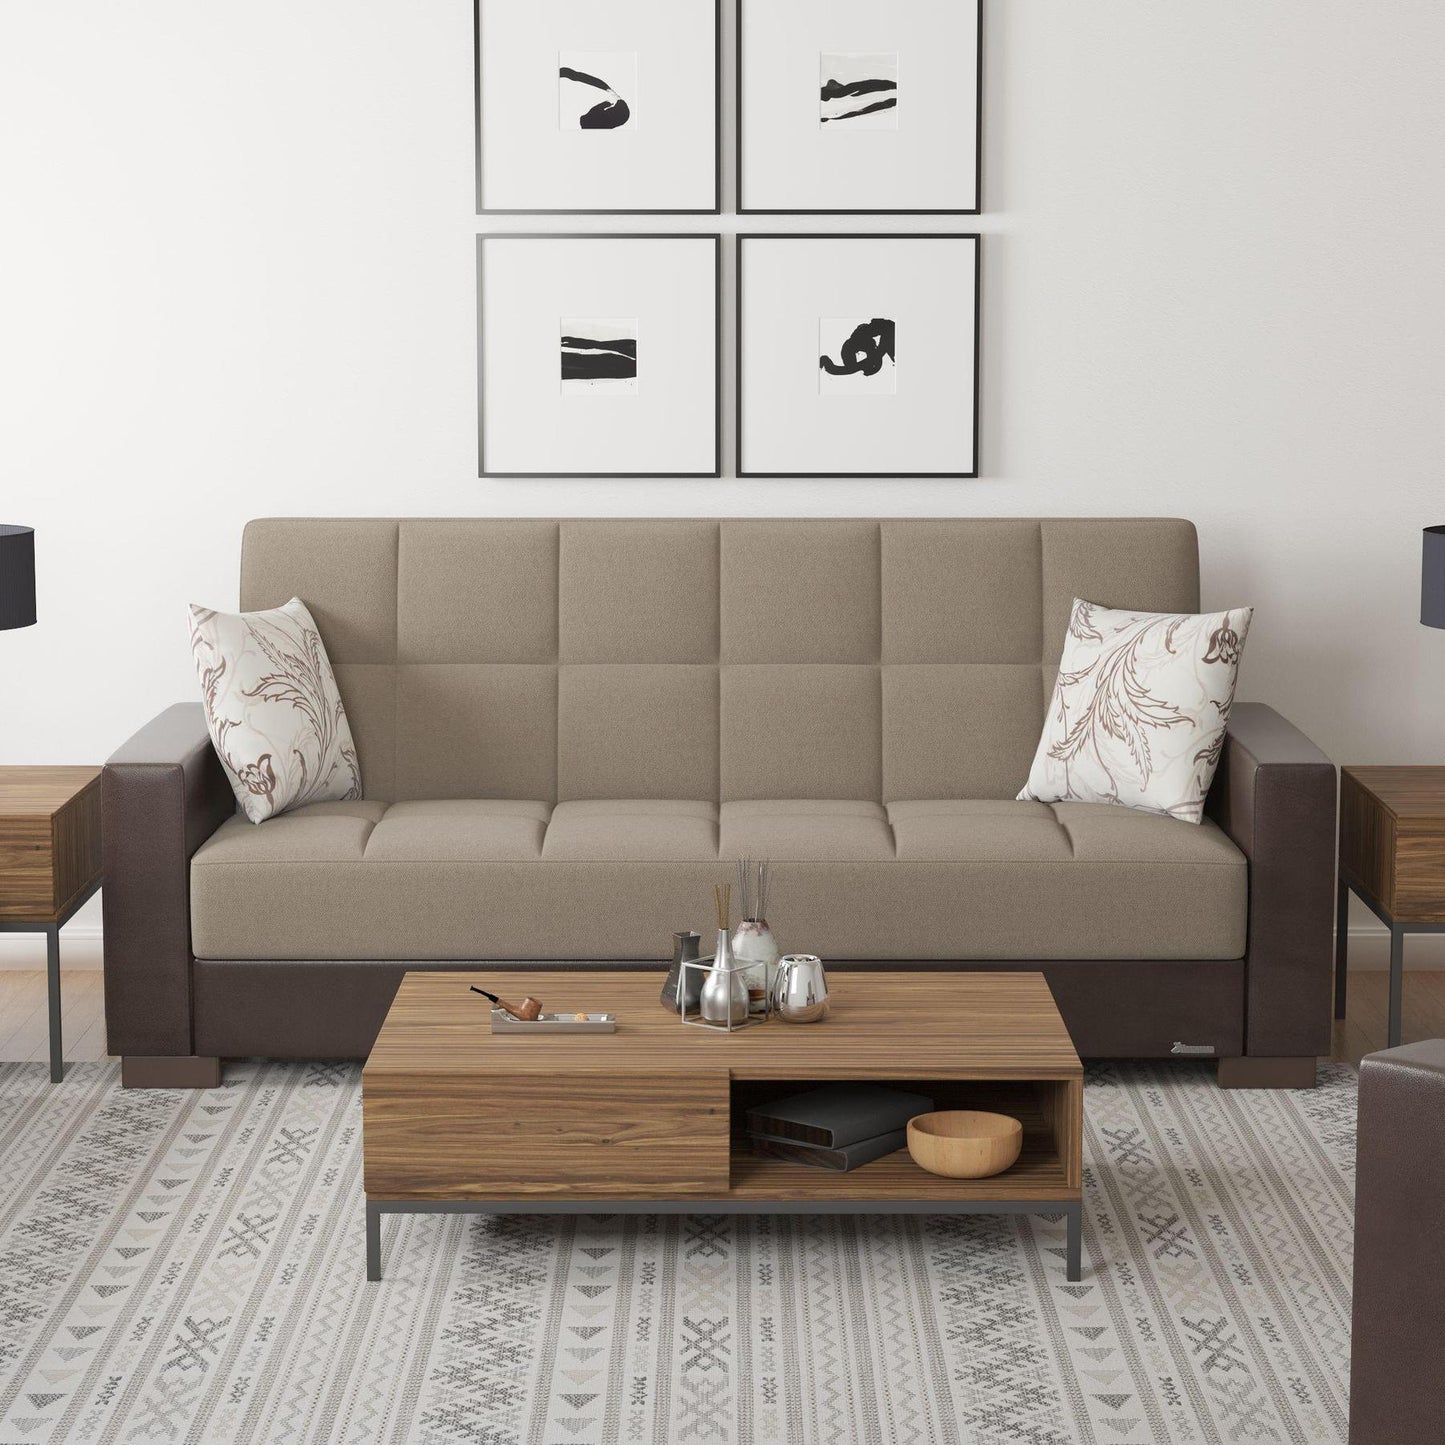 Modern design, Light Taupe, Dark Brown , Chenille, Artificial Leather upholstered convertible sleeper Sofabed with underseat storage from Voyage Track by Ottomanson in living room lifestyle setting by itself. This Sofabed measures 90 inches width by 36 inches depth by 41 inches height.